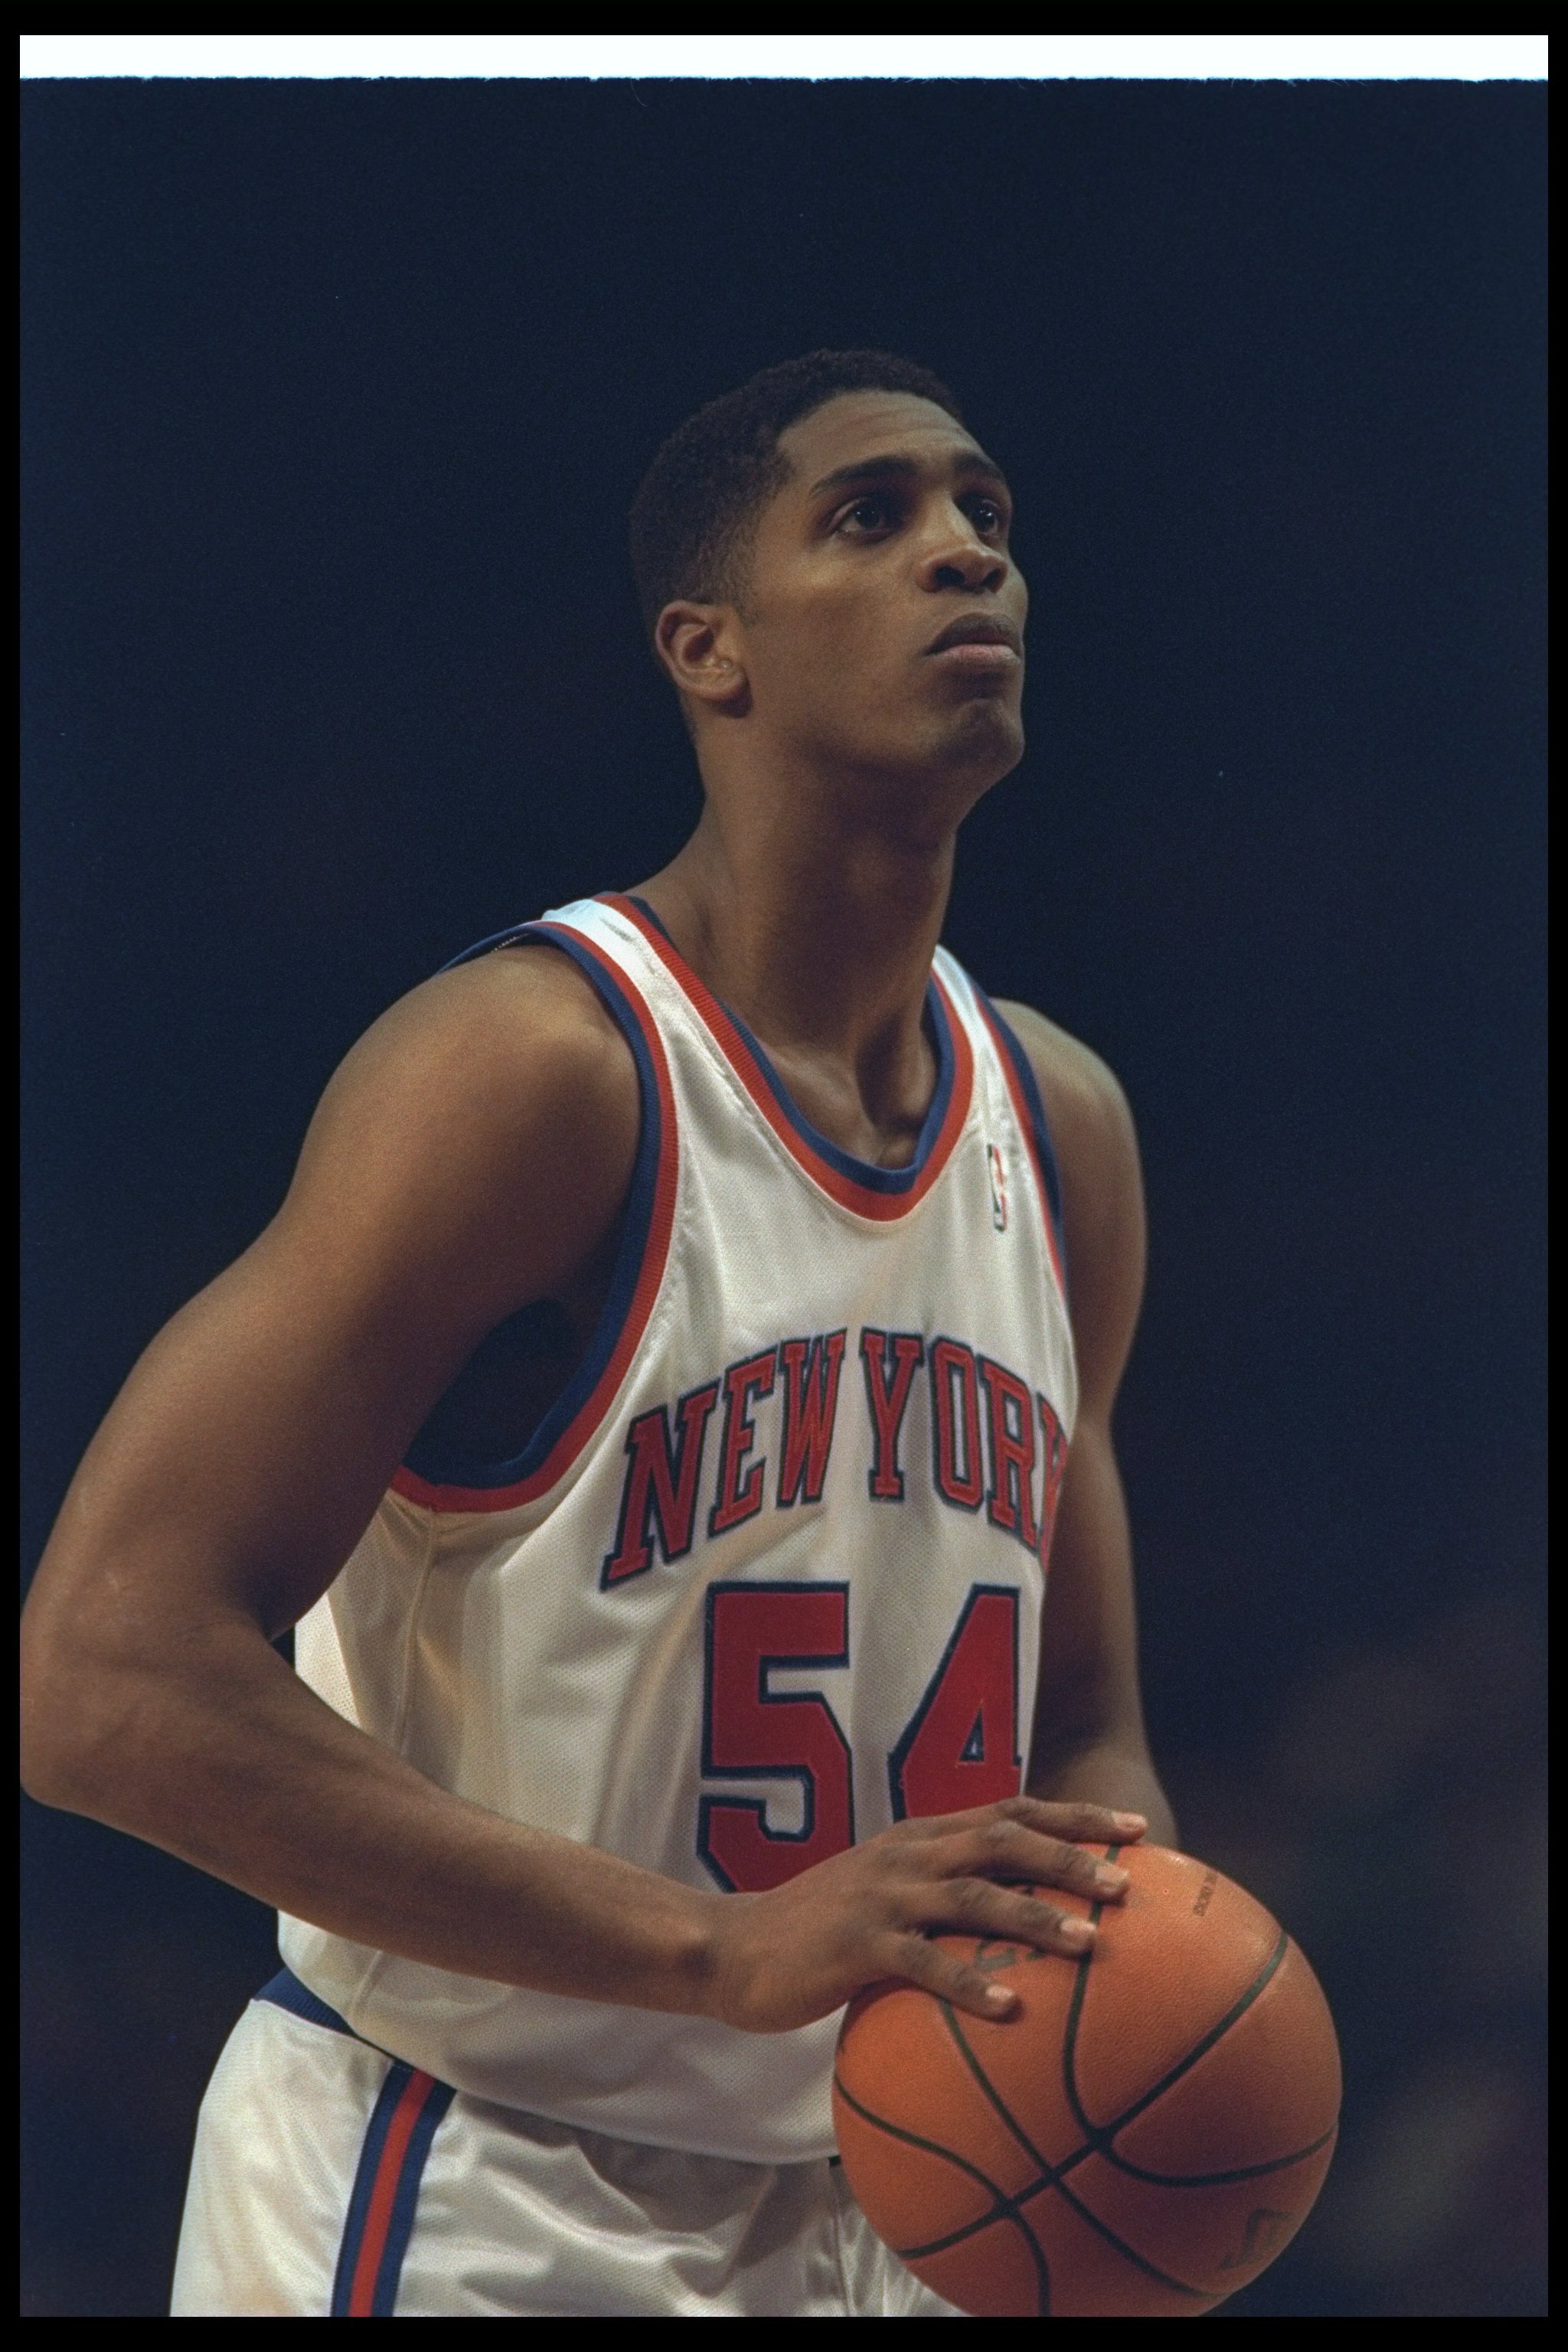 Live with Charles Smith (Former New York Knicks Player in the 90s) 